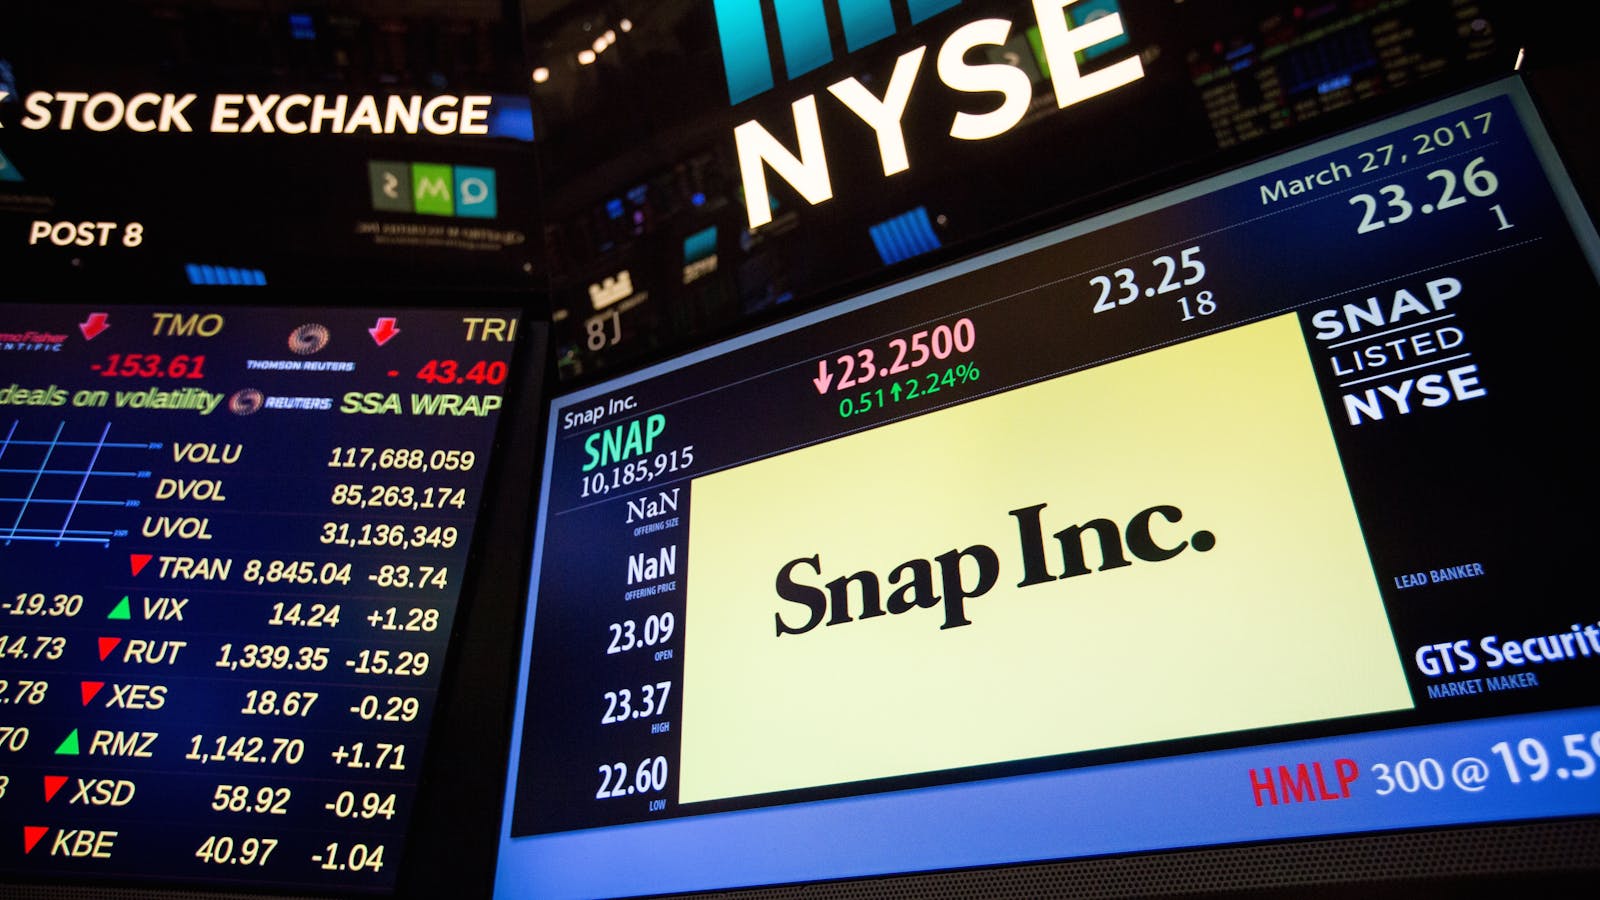 Snap stock details on display at the New York Stock Exchange last year. Photo by Bloomberg